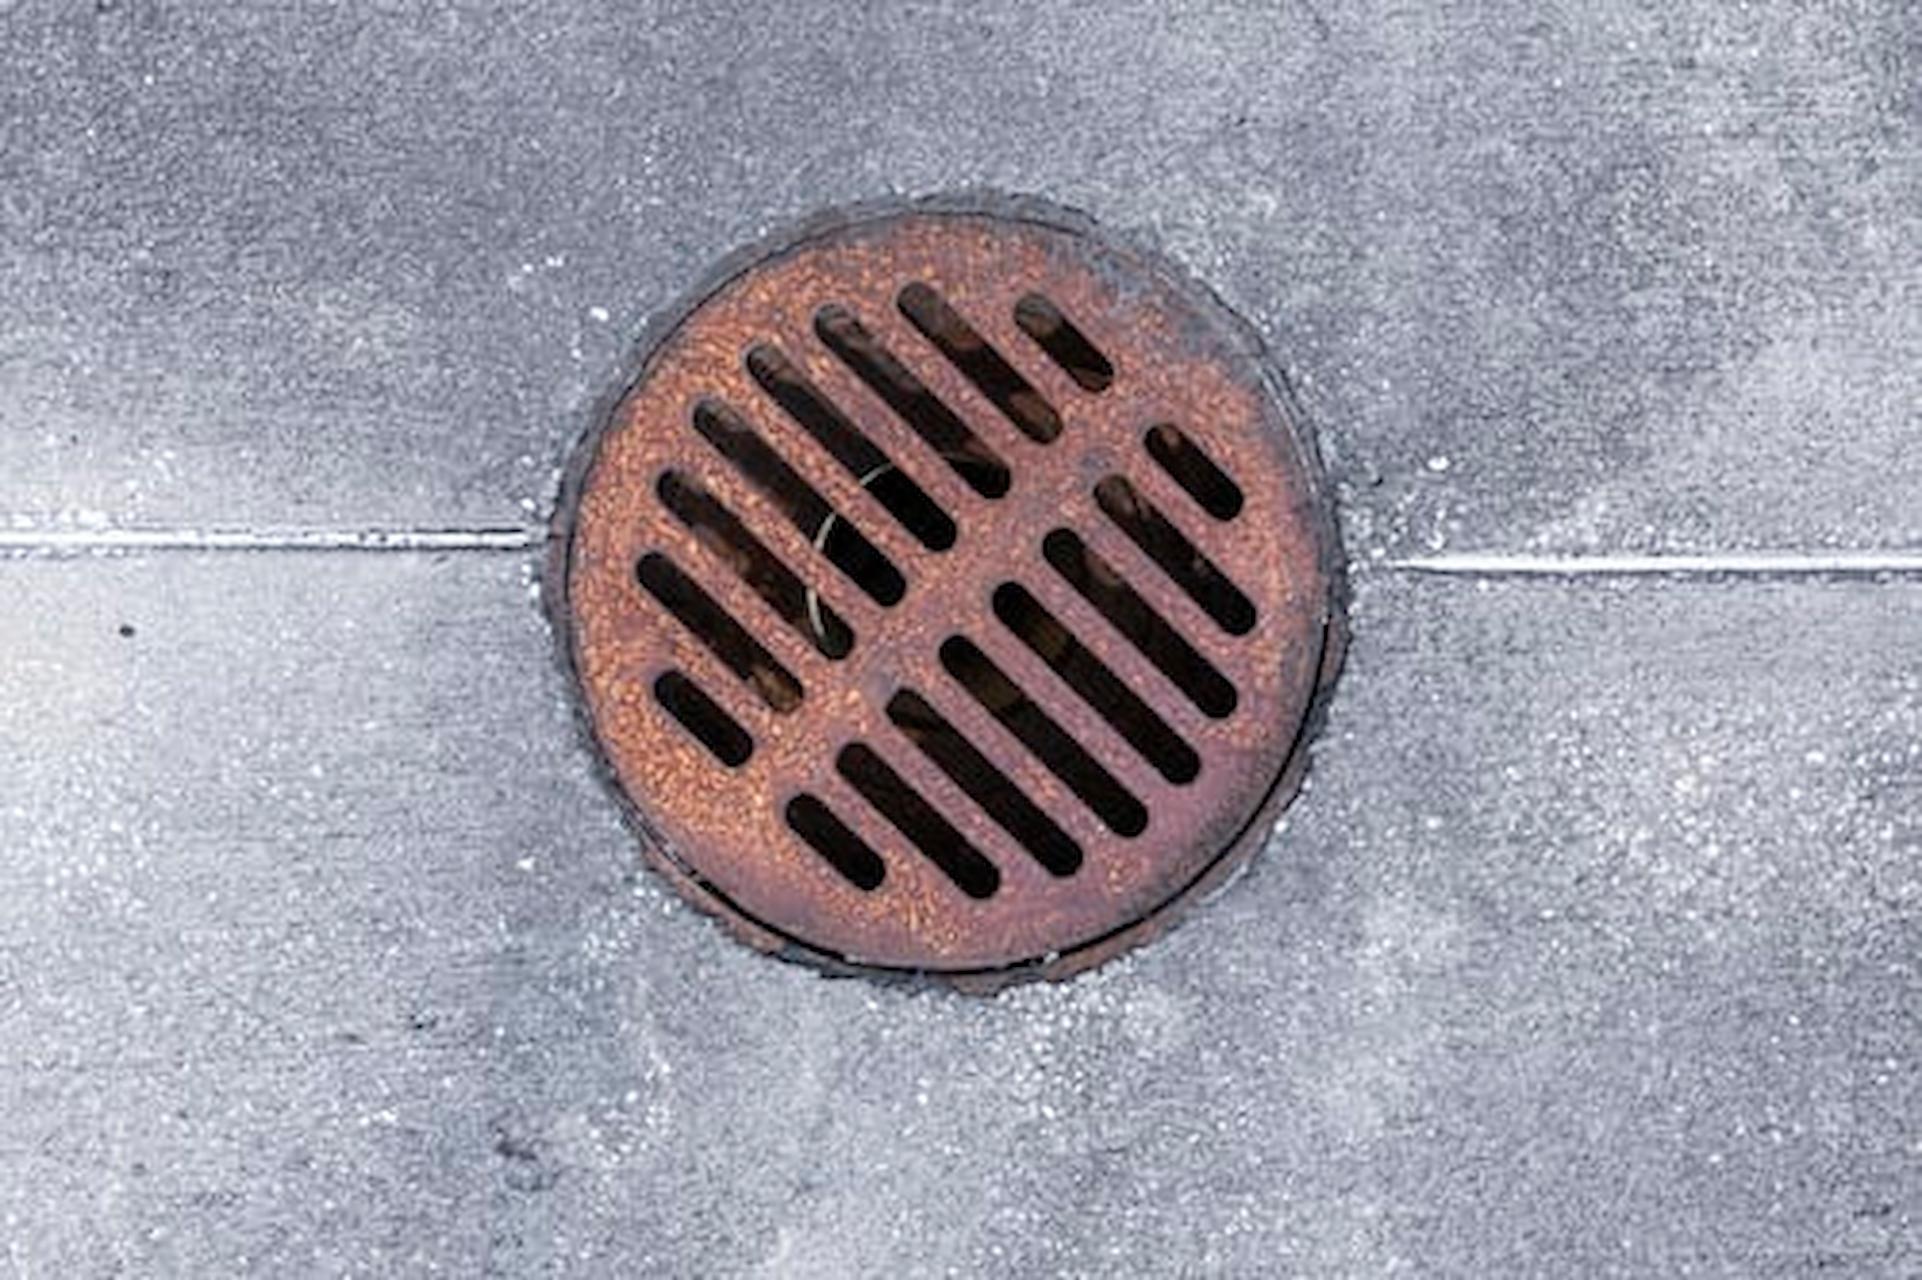 Top 7 Reasons To Opt For Drain Jetting Instead Of Conventional Methods